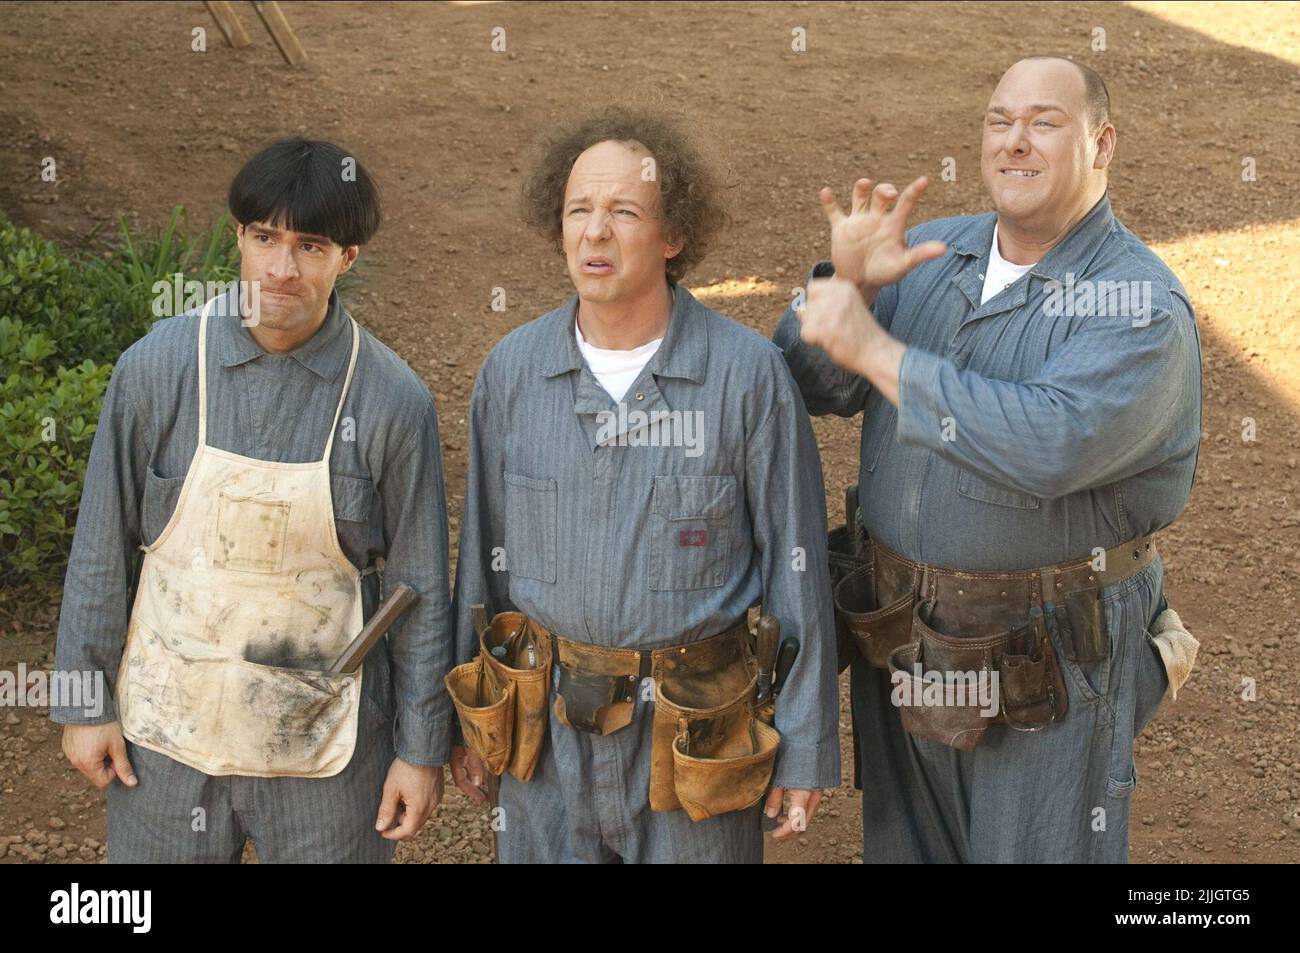 CHRIS DIAMANTOPOULOS, SEAN HAYES, WILL SASSO, THE THREE STOOGES, 2012 Stock Photo